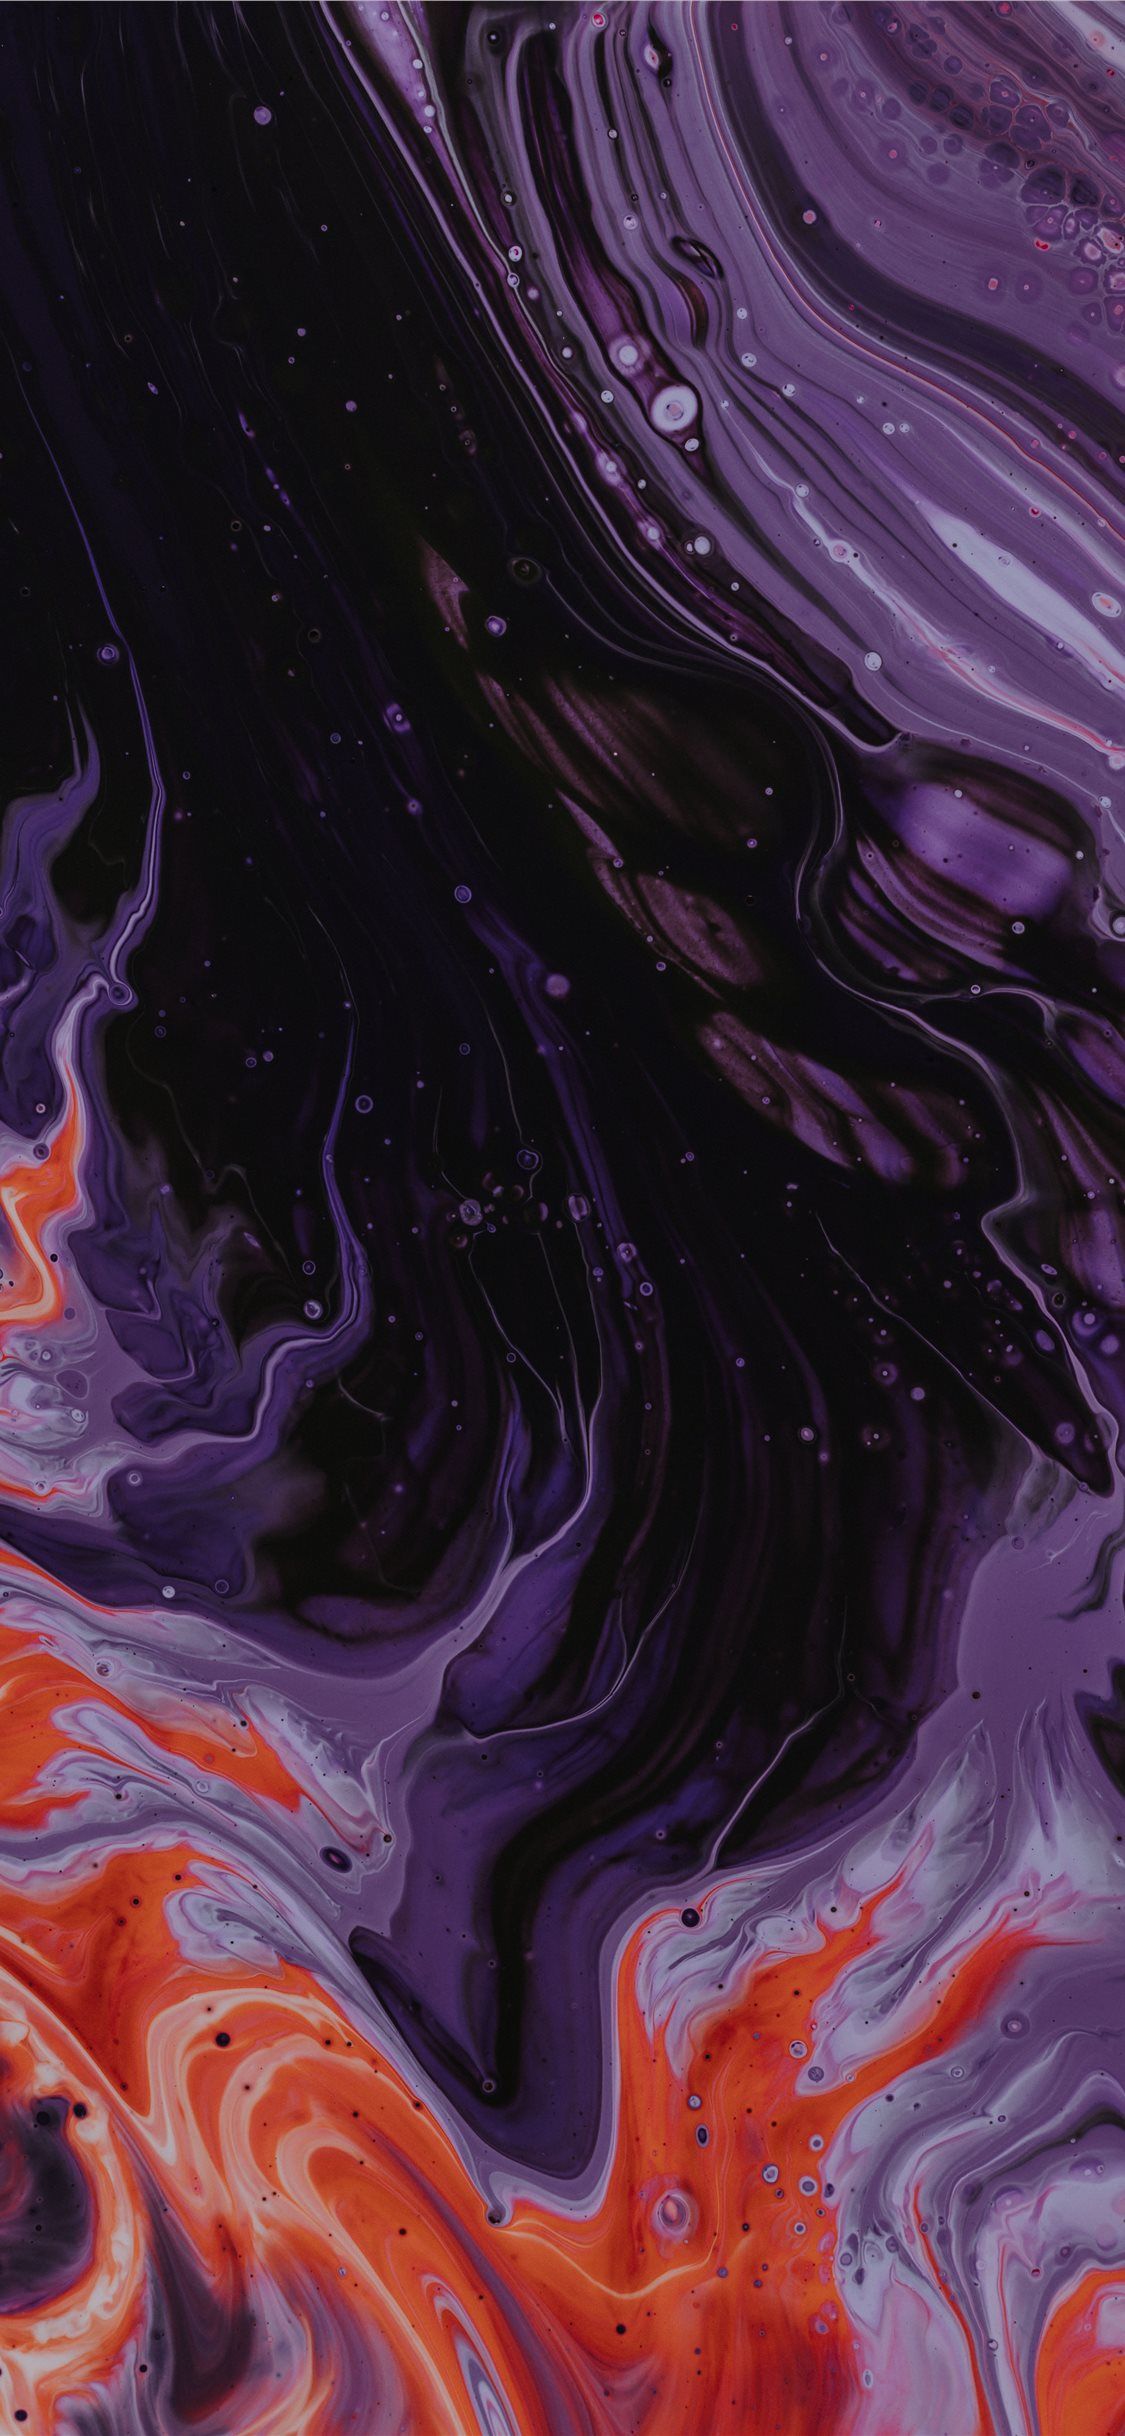 purple black and orange abstract paintin iPhone X Wallpaper Free